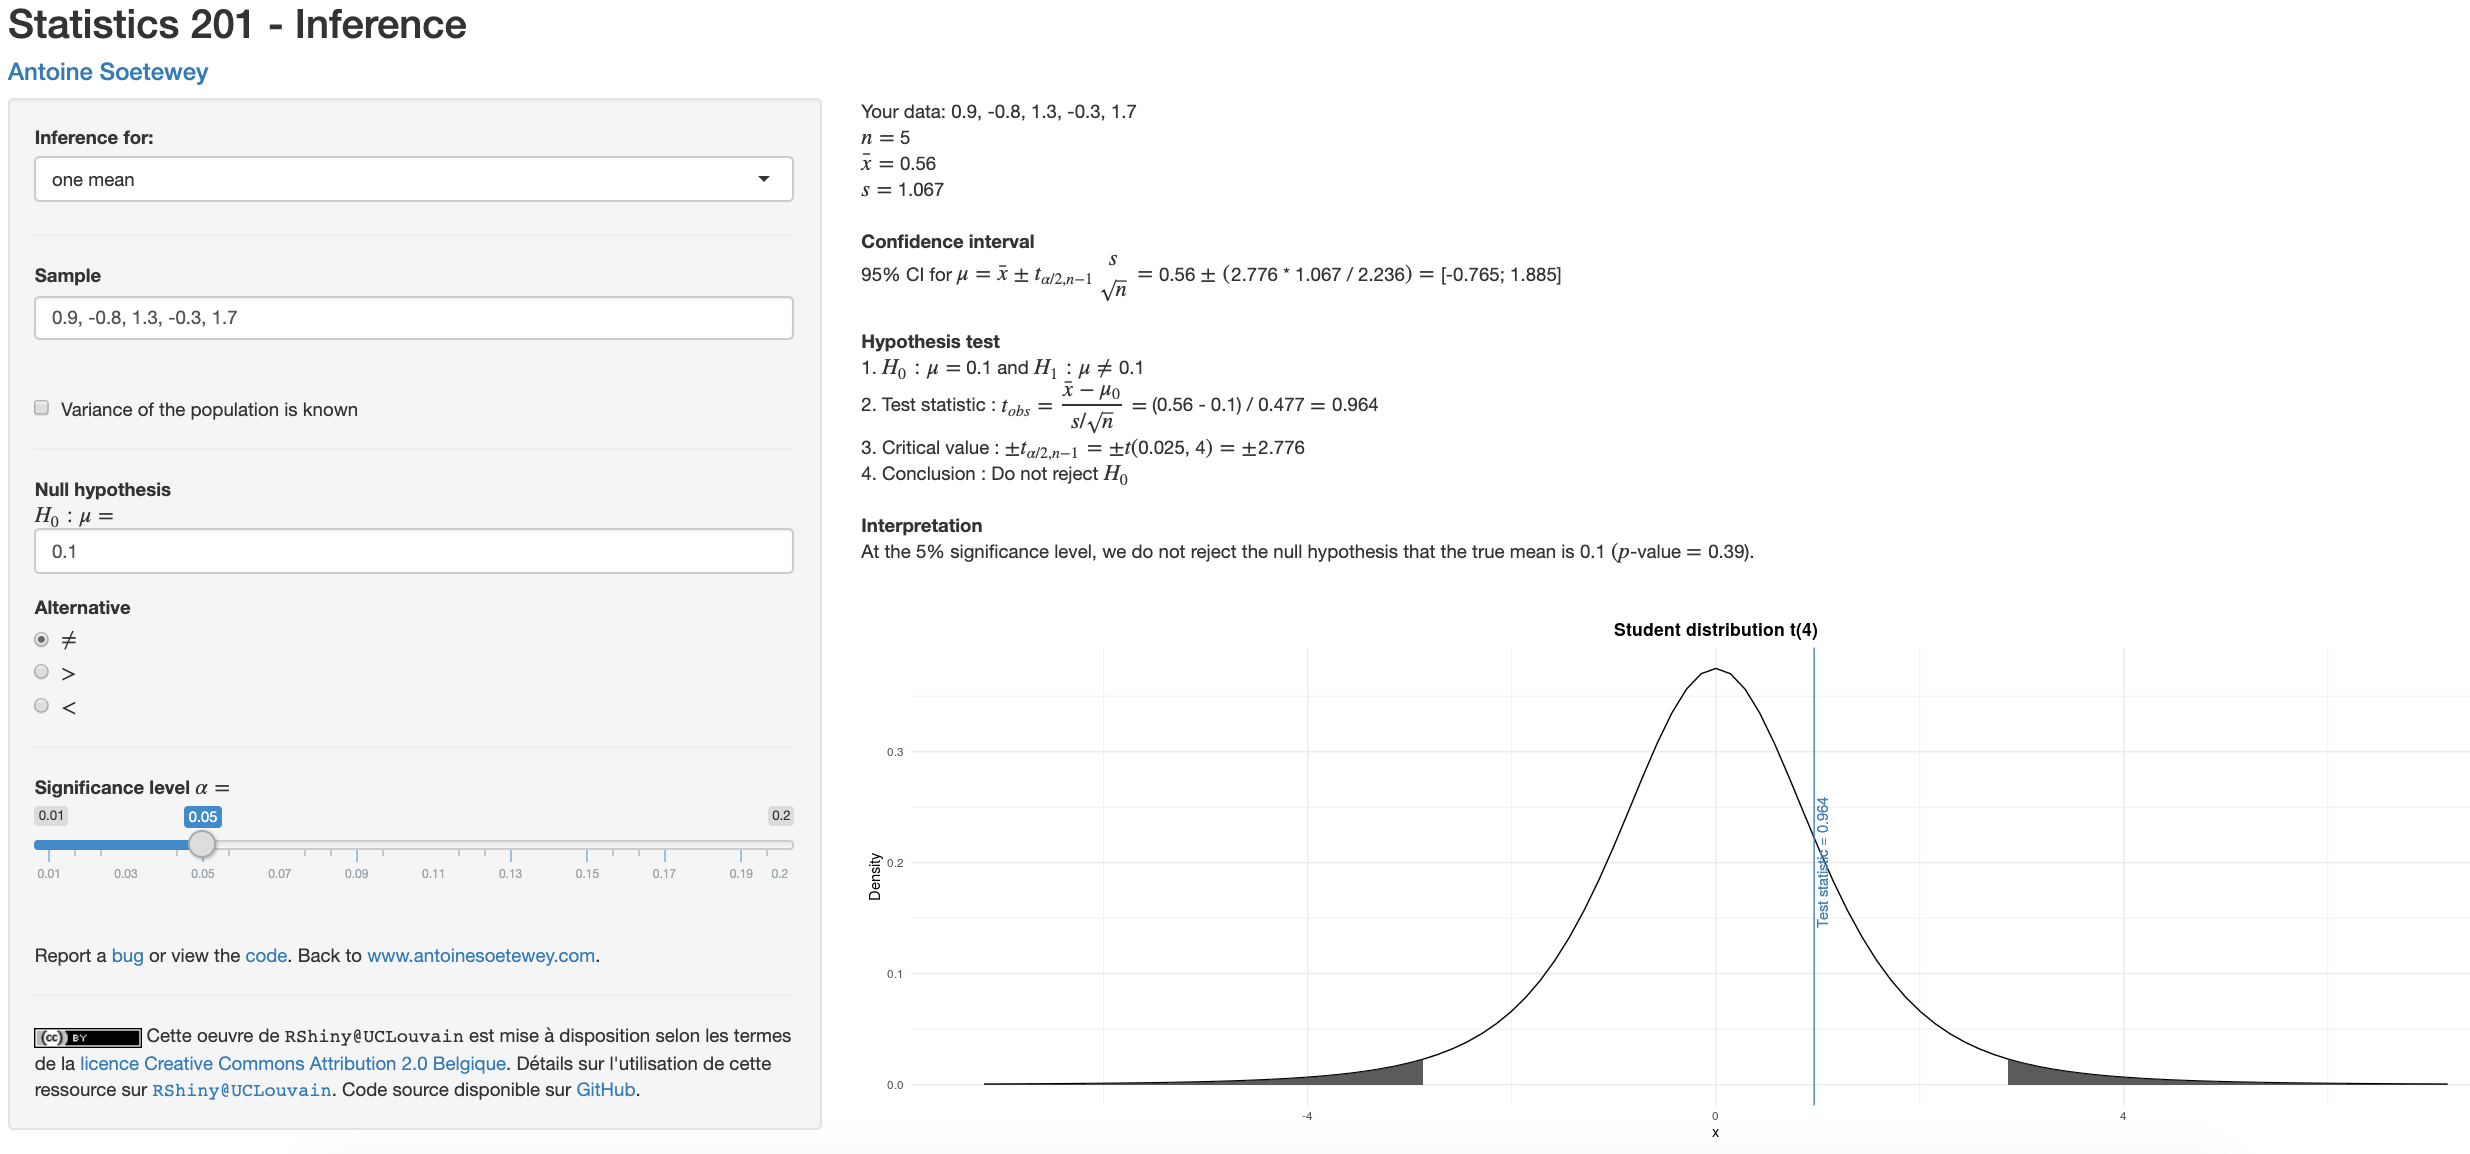 A Shiny app for inferential statistics by hand  by Antoine